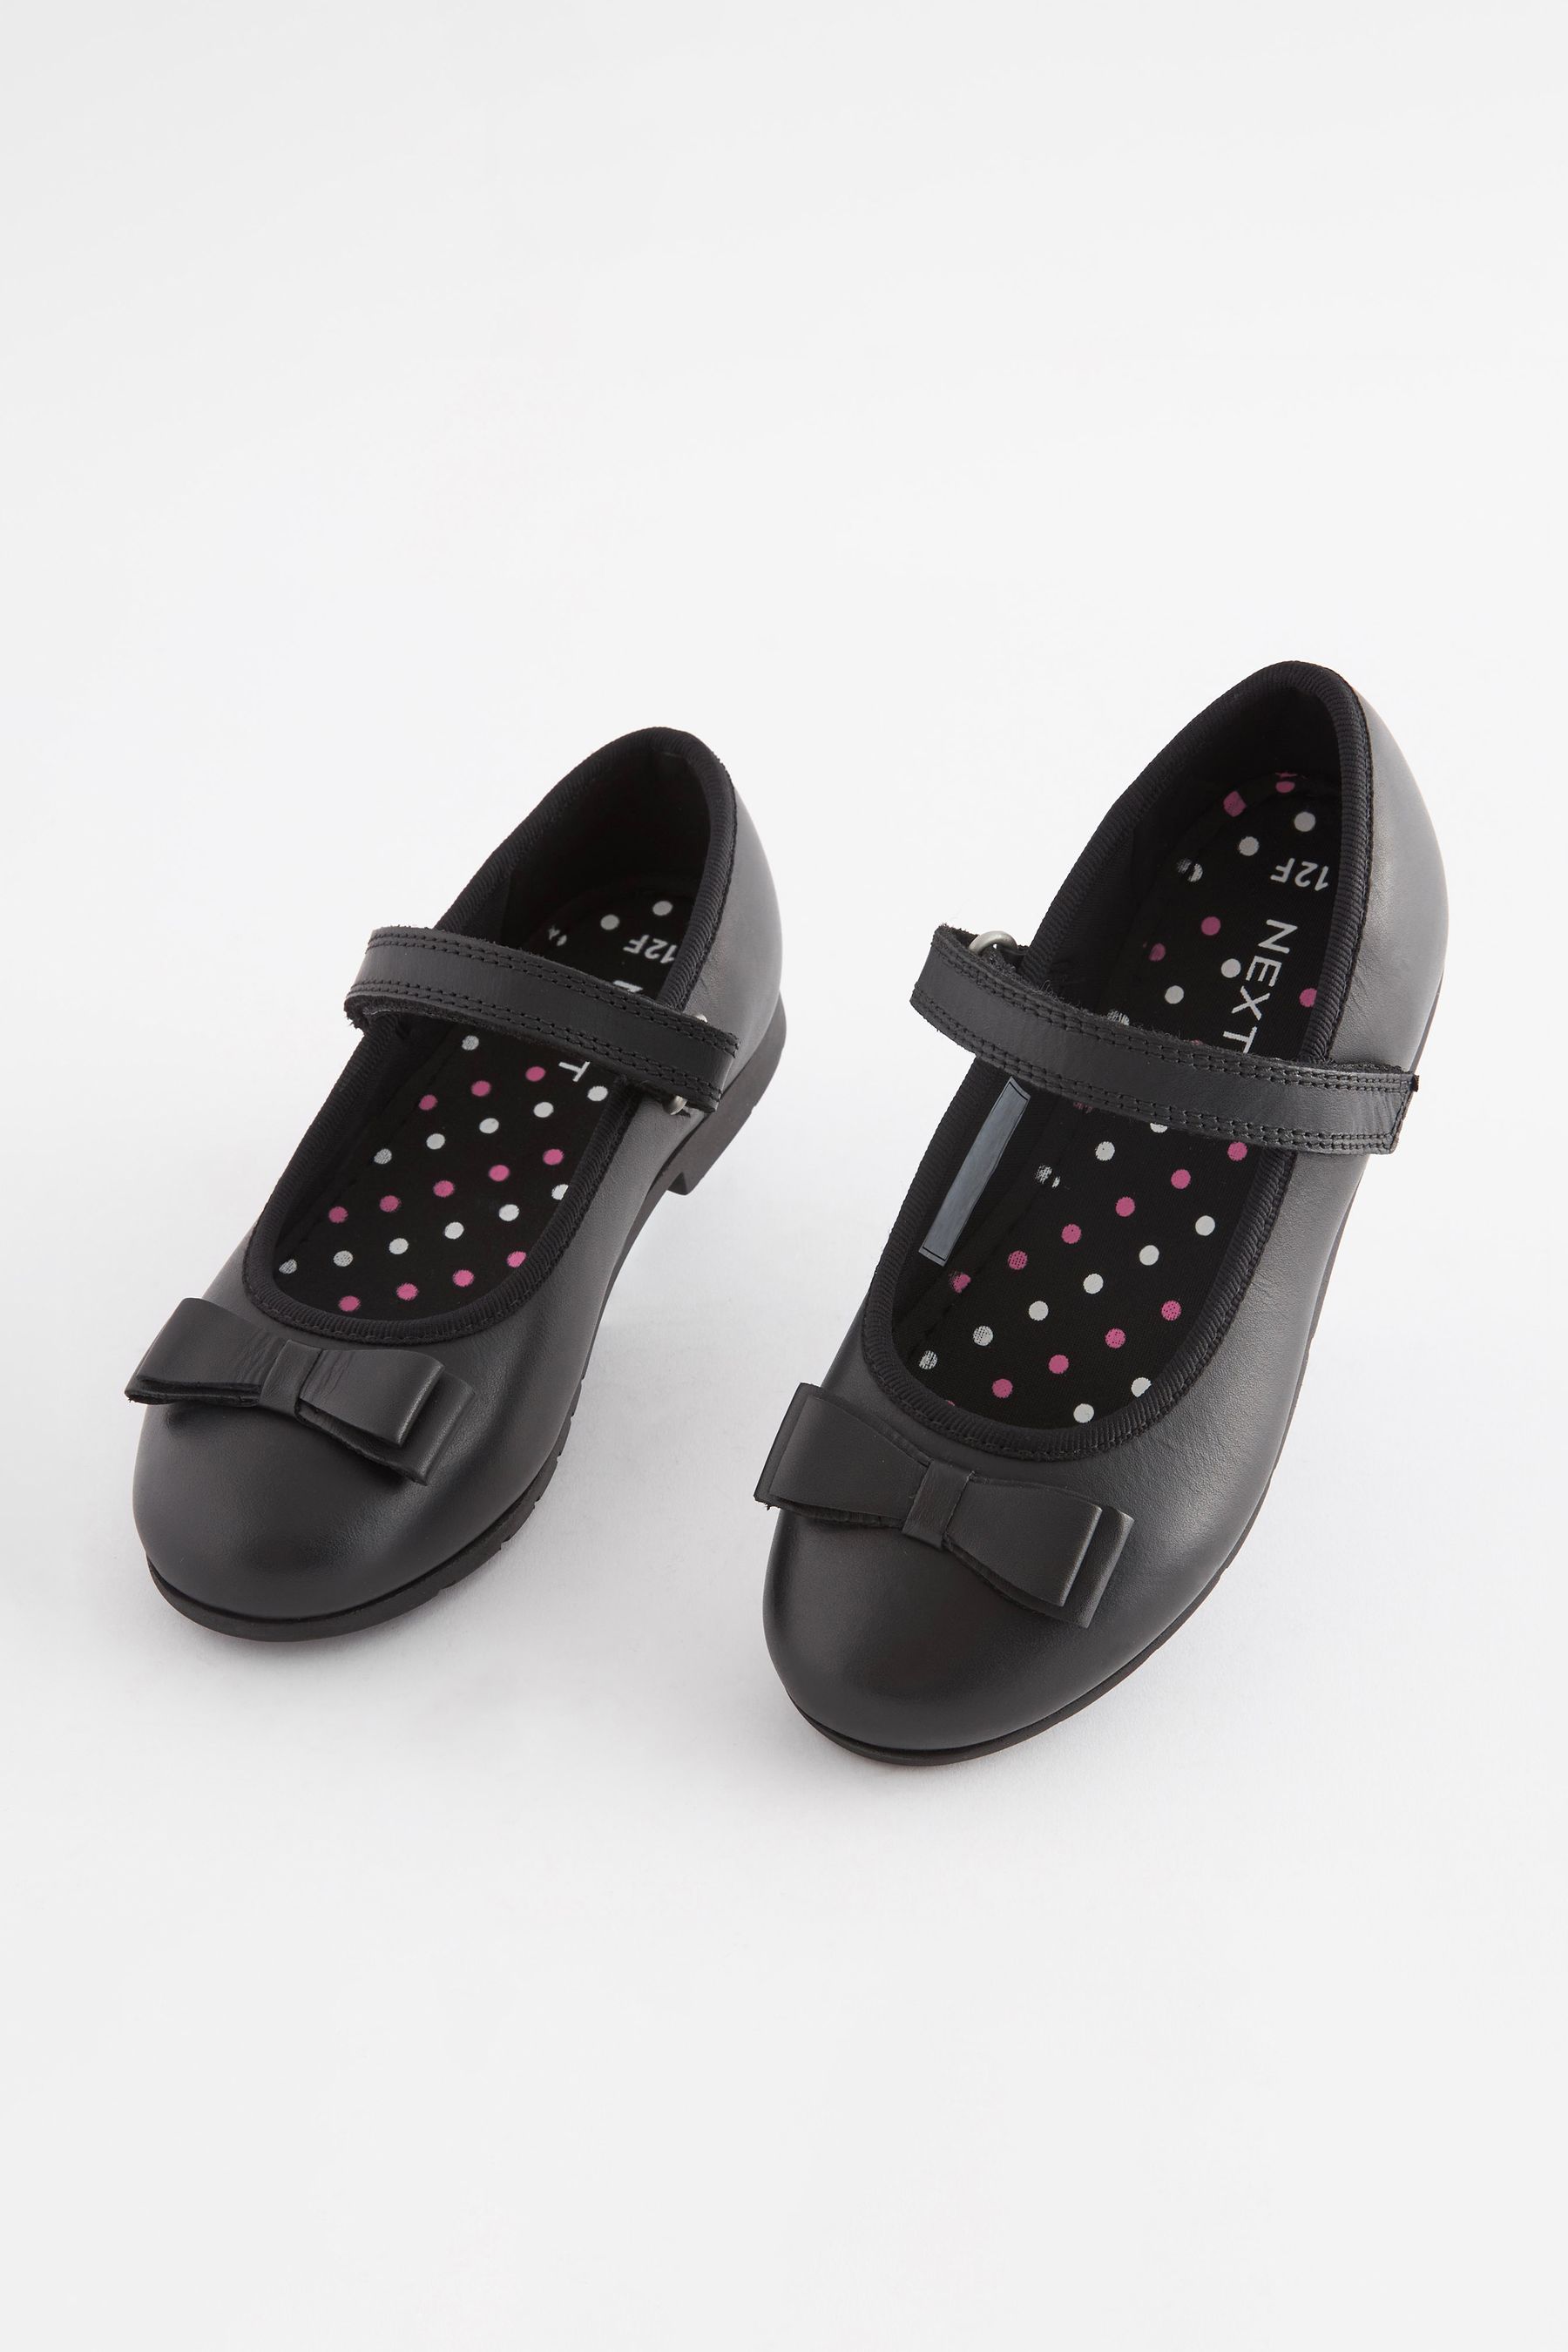 Buy Black Narrow Fit (E) School Leather Bow Mary Jane Shoes from the ...